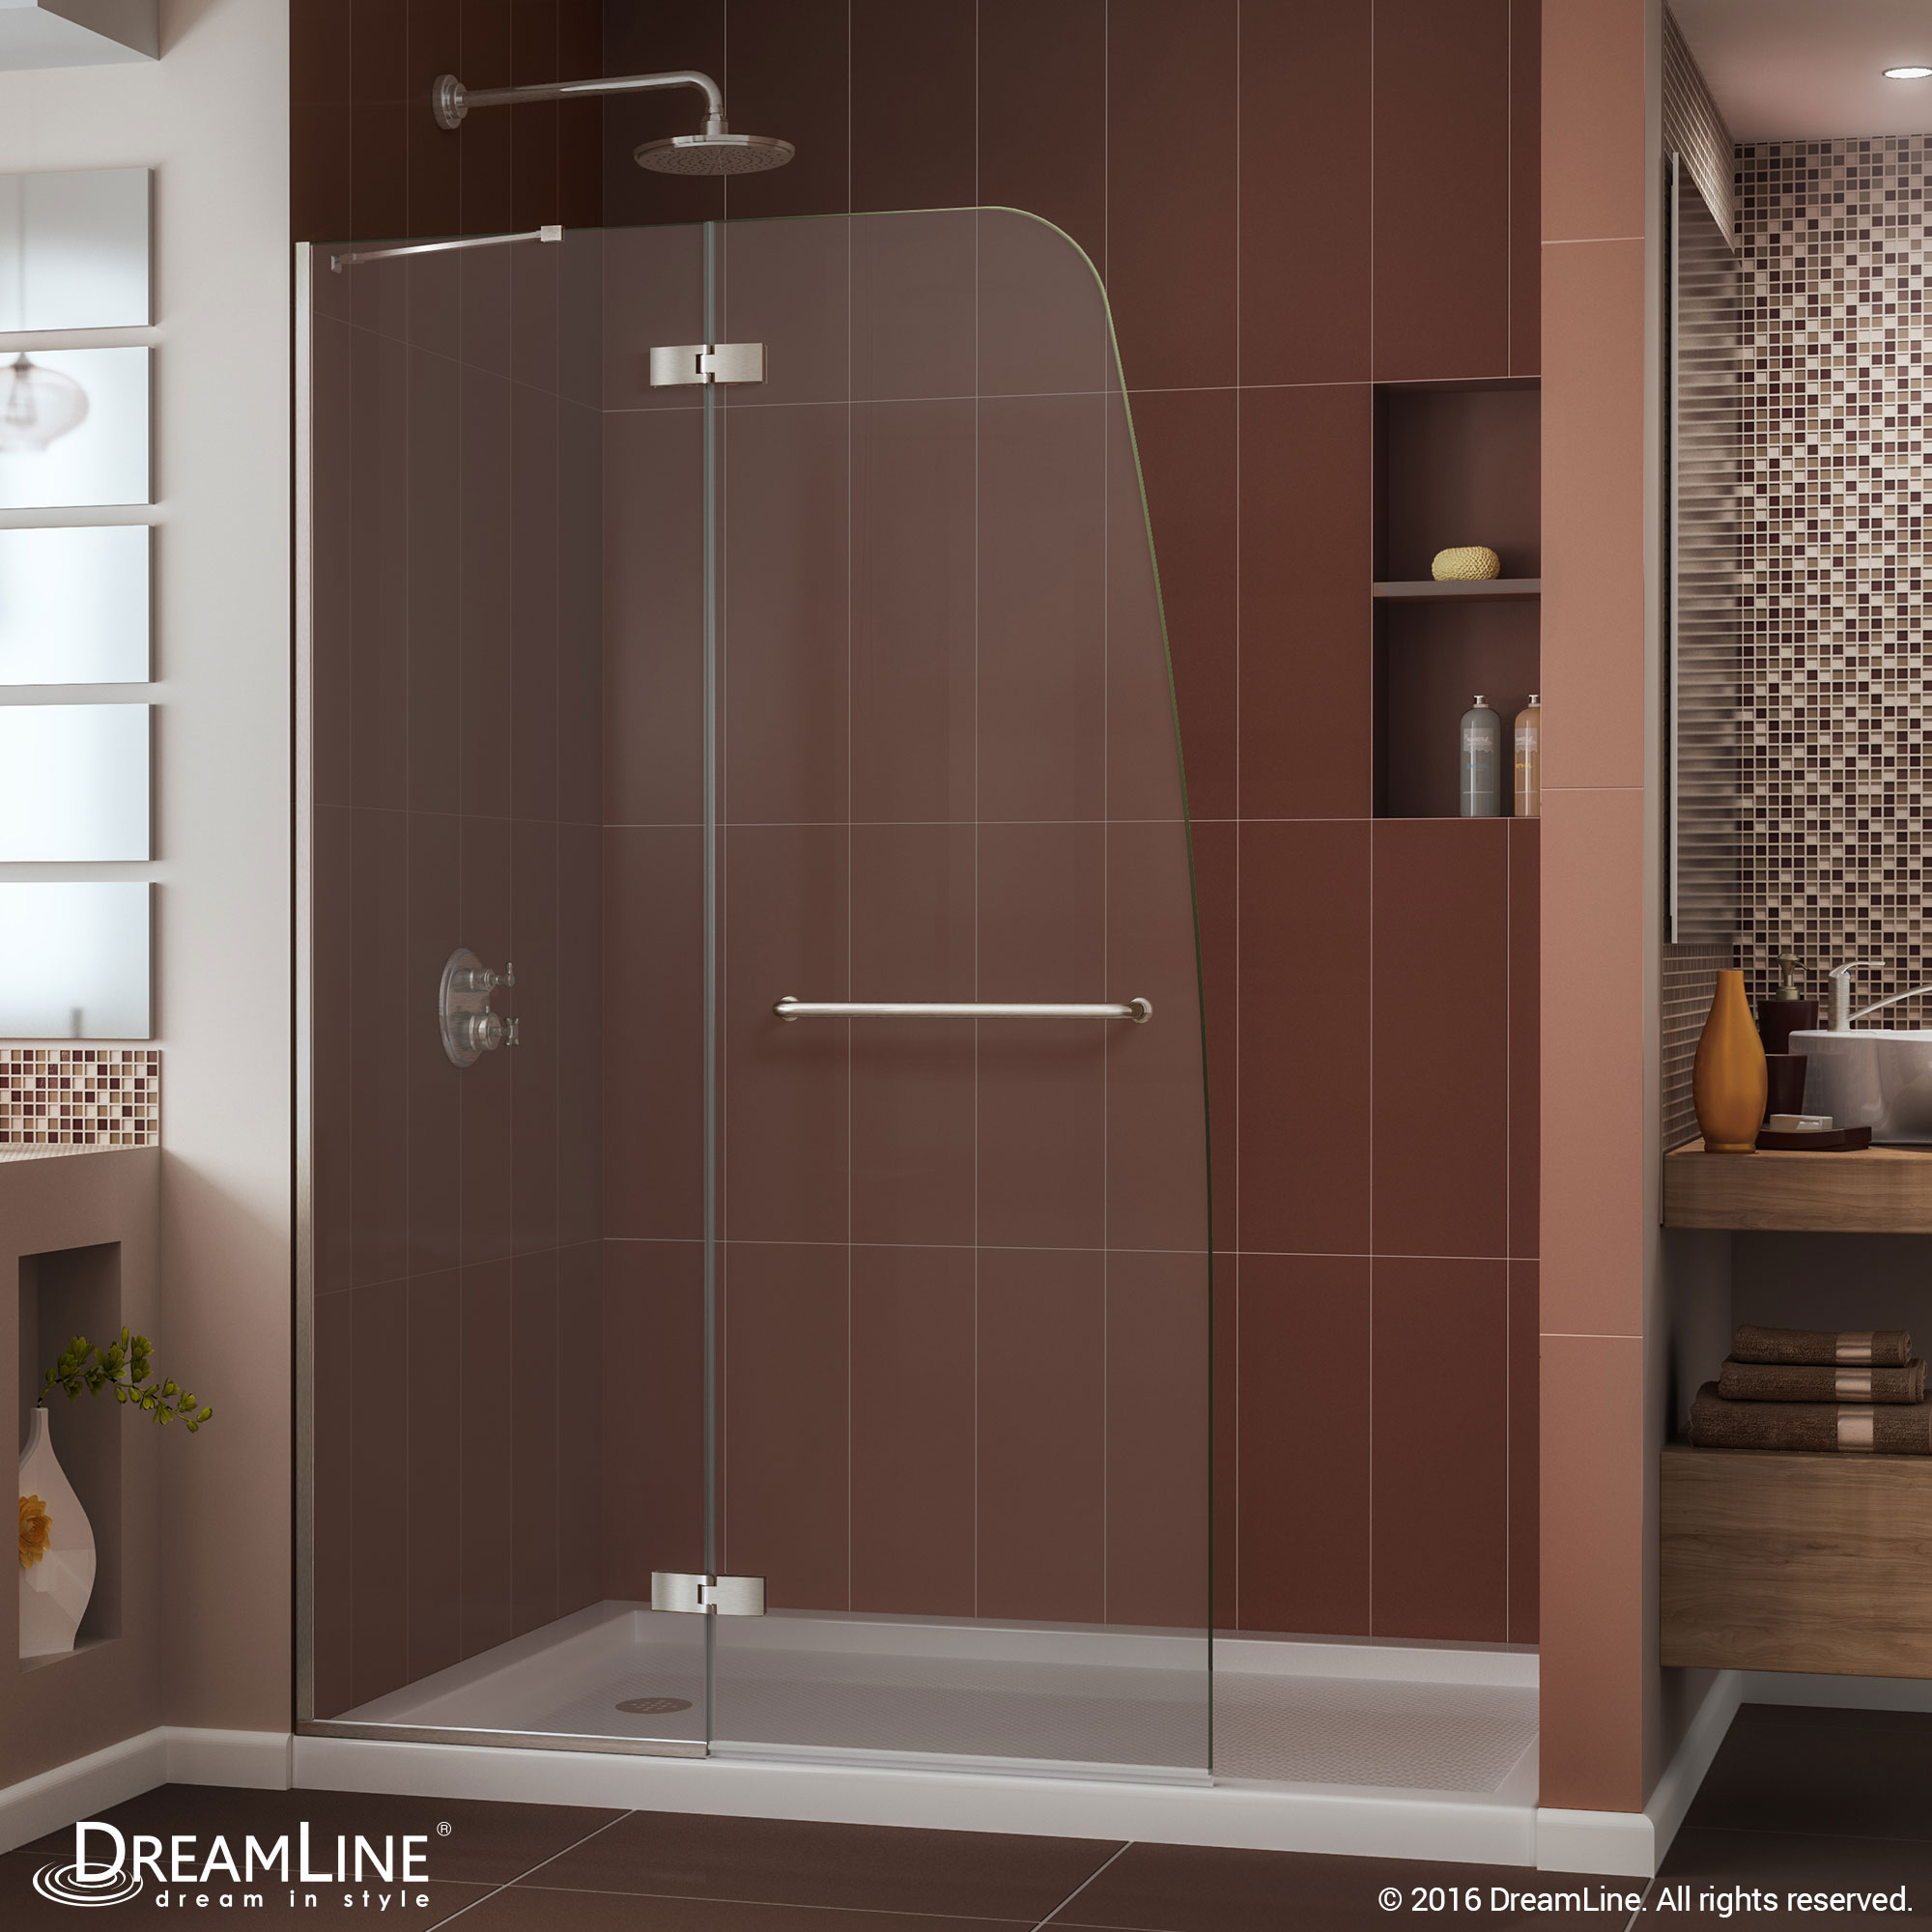 DreamLine Aqua Ultra 36 in. D x 60 in. W x 74 3/4 in. H Frameless Shower Door in Chrome and Left Drain Biscuit Base Kit